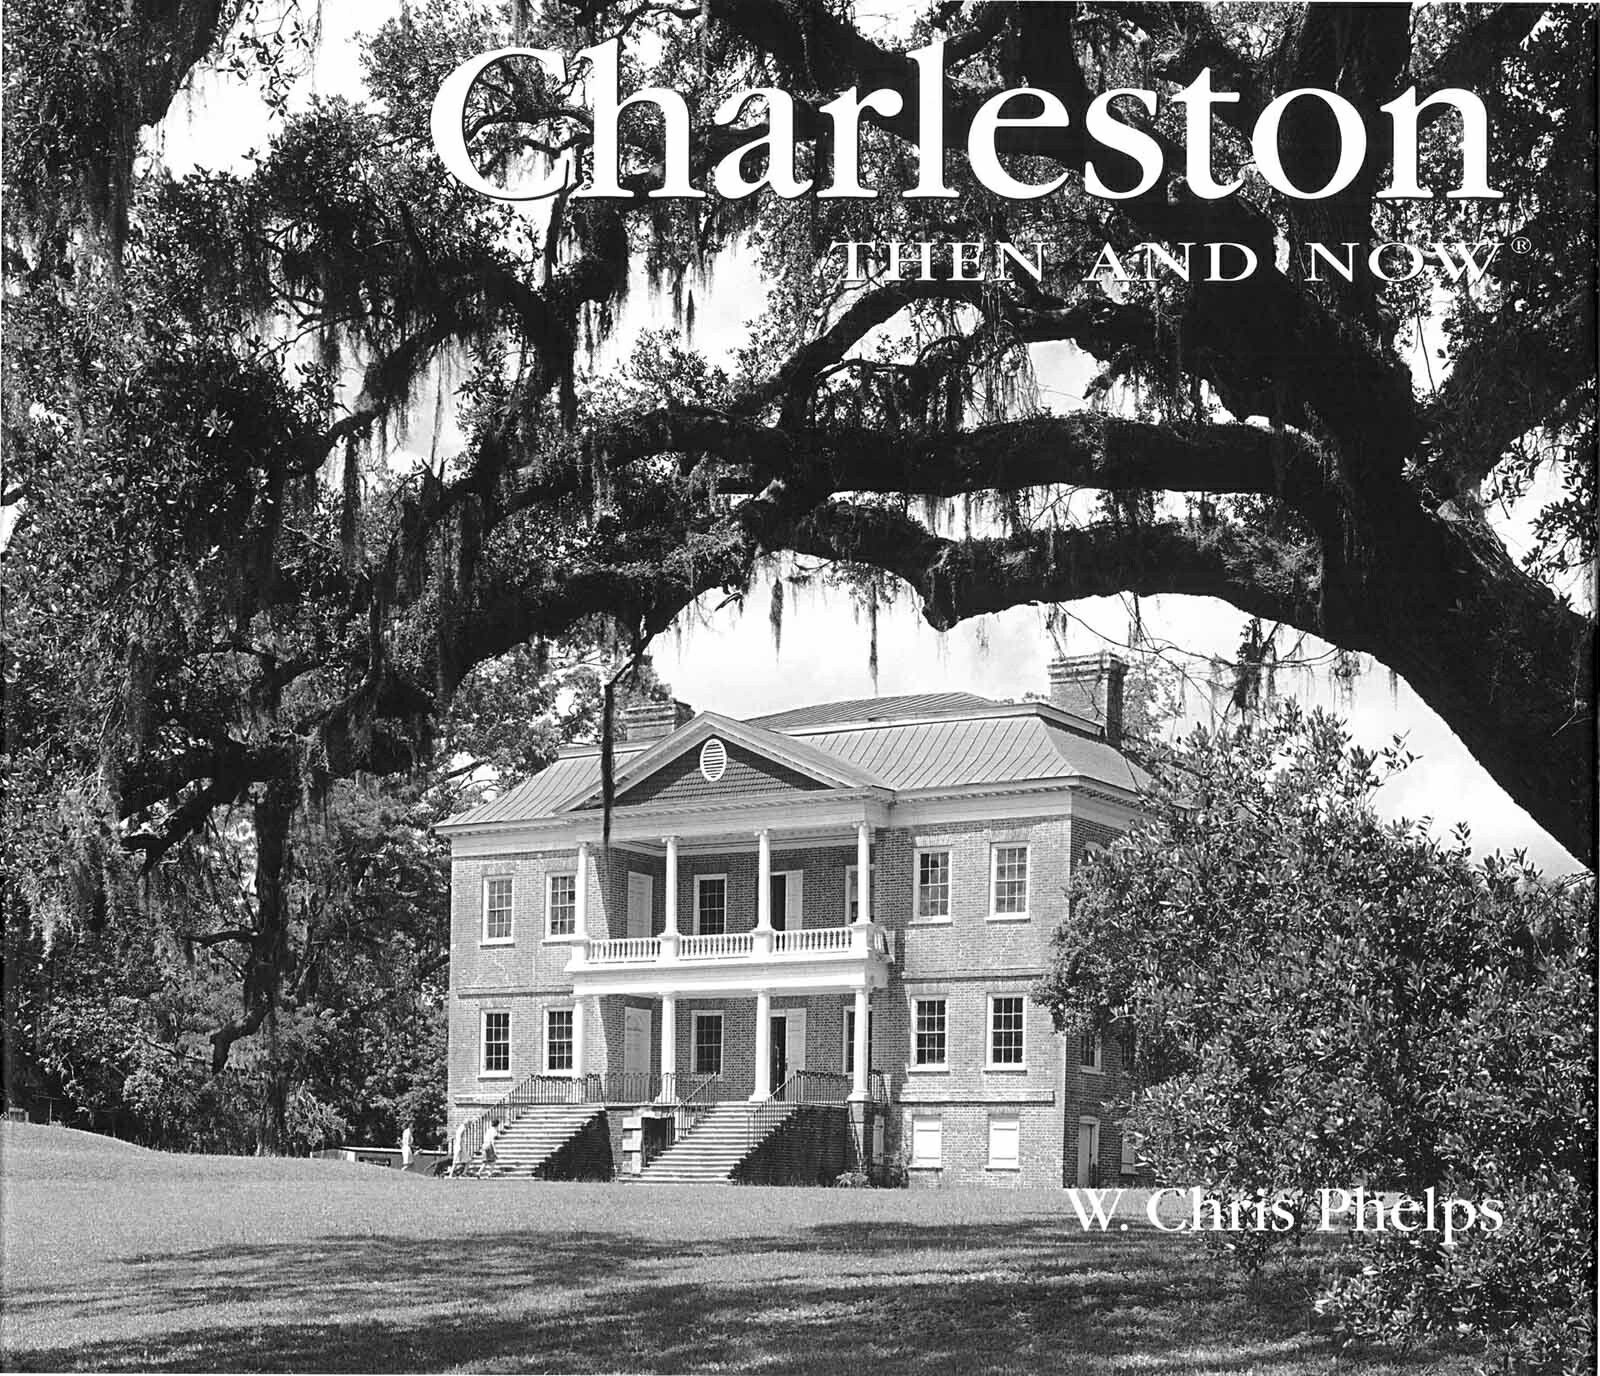 Charleston Then & Now City Series Book - Hardcover Edition